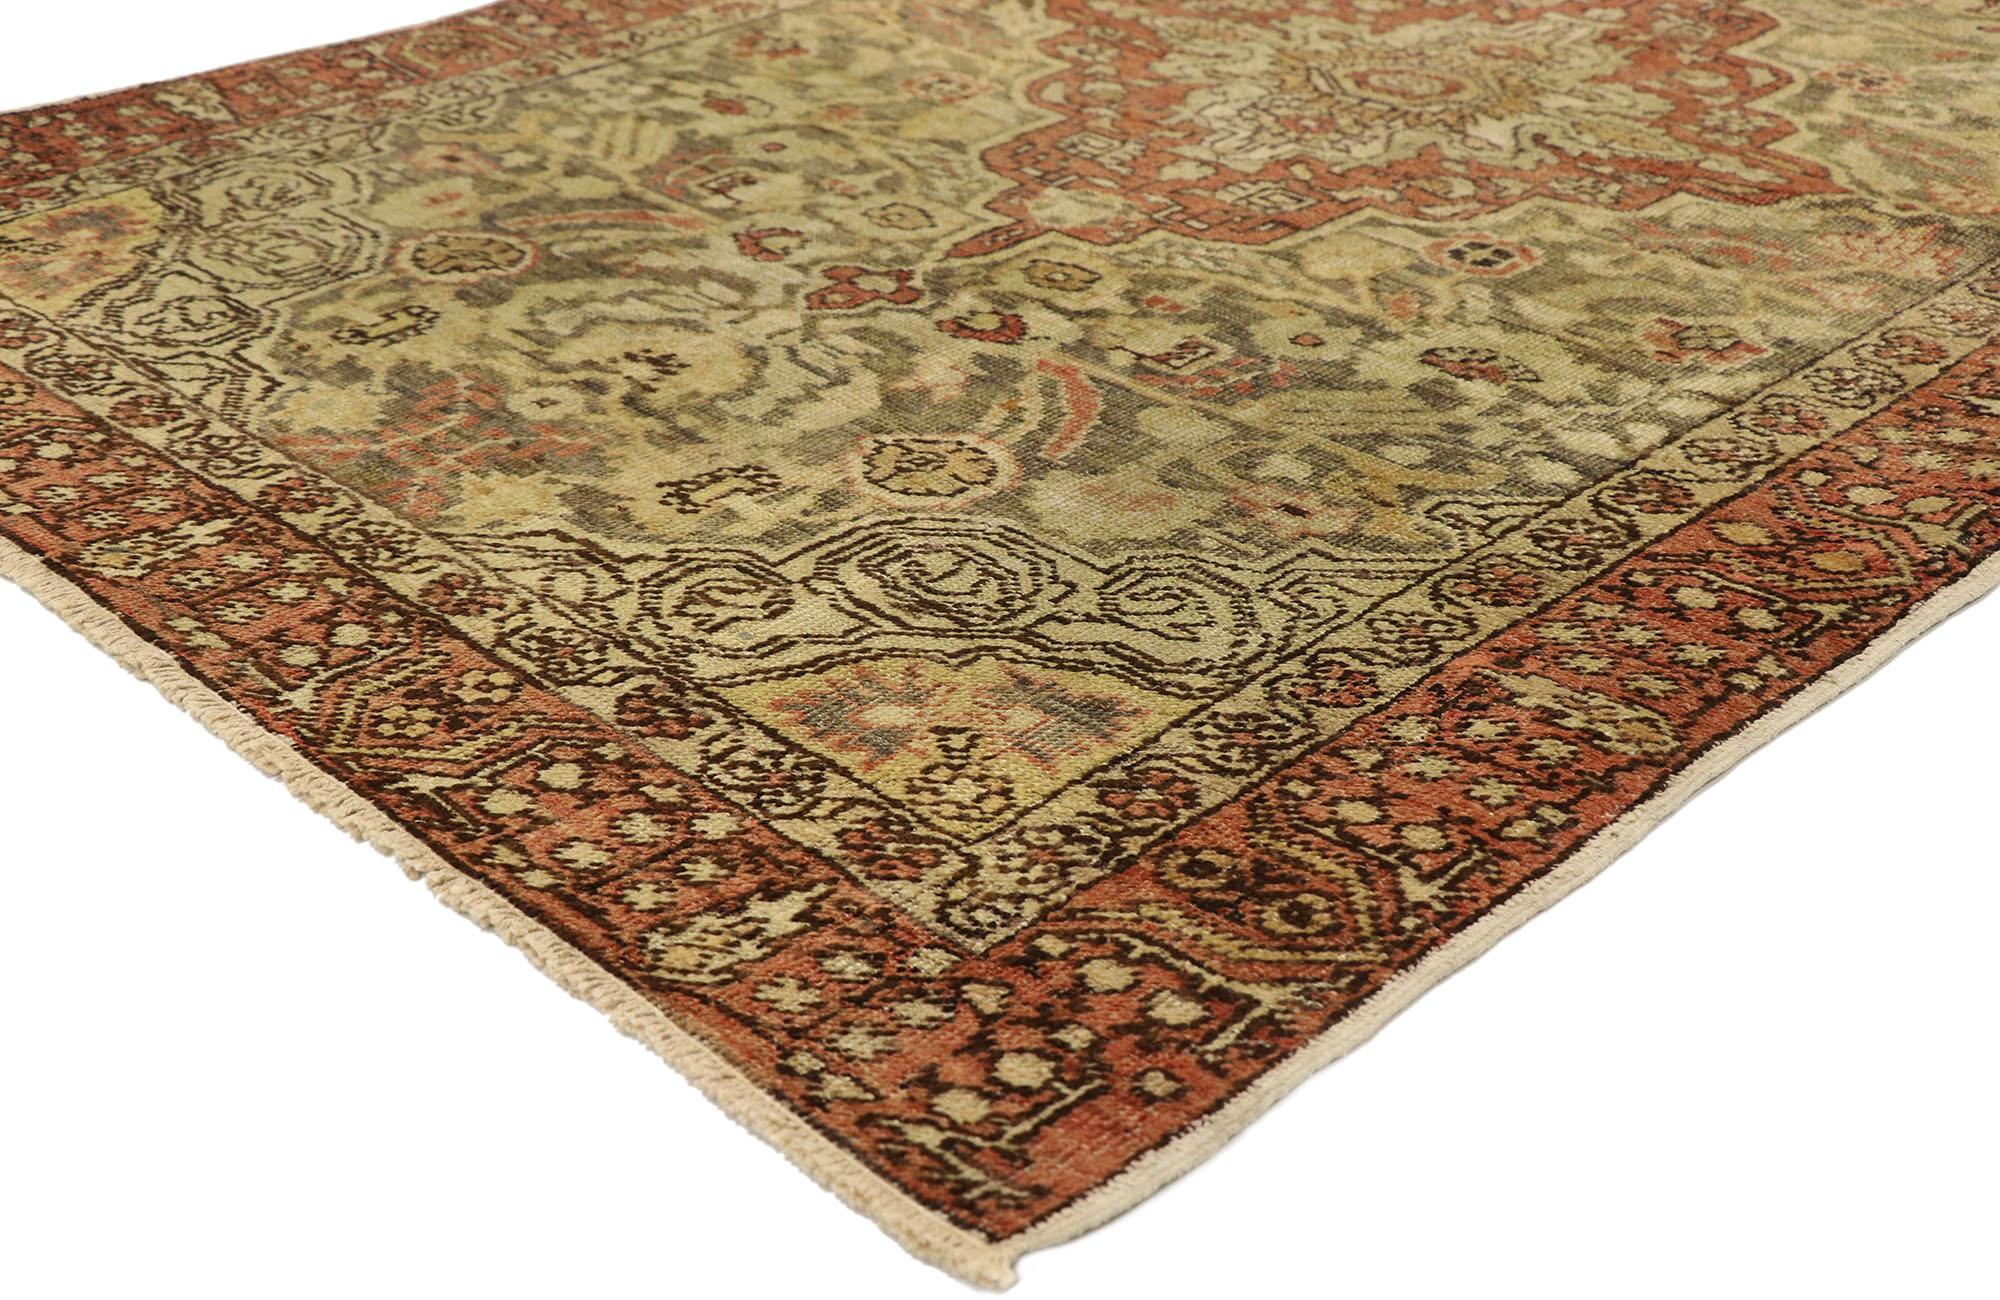 50527, distressed vintage Turkish Sivas rug with Modern Rustic Artisan style 03'10 X 06'01. Warm and inviting with rustic artisan style, this hand knotted wool distressed vintage Turkish Sivas rug features a central cusped diamond lozenge medallion.